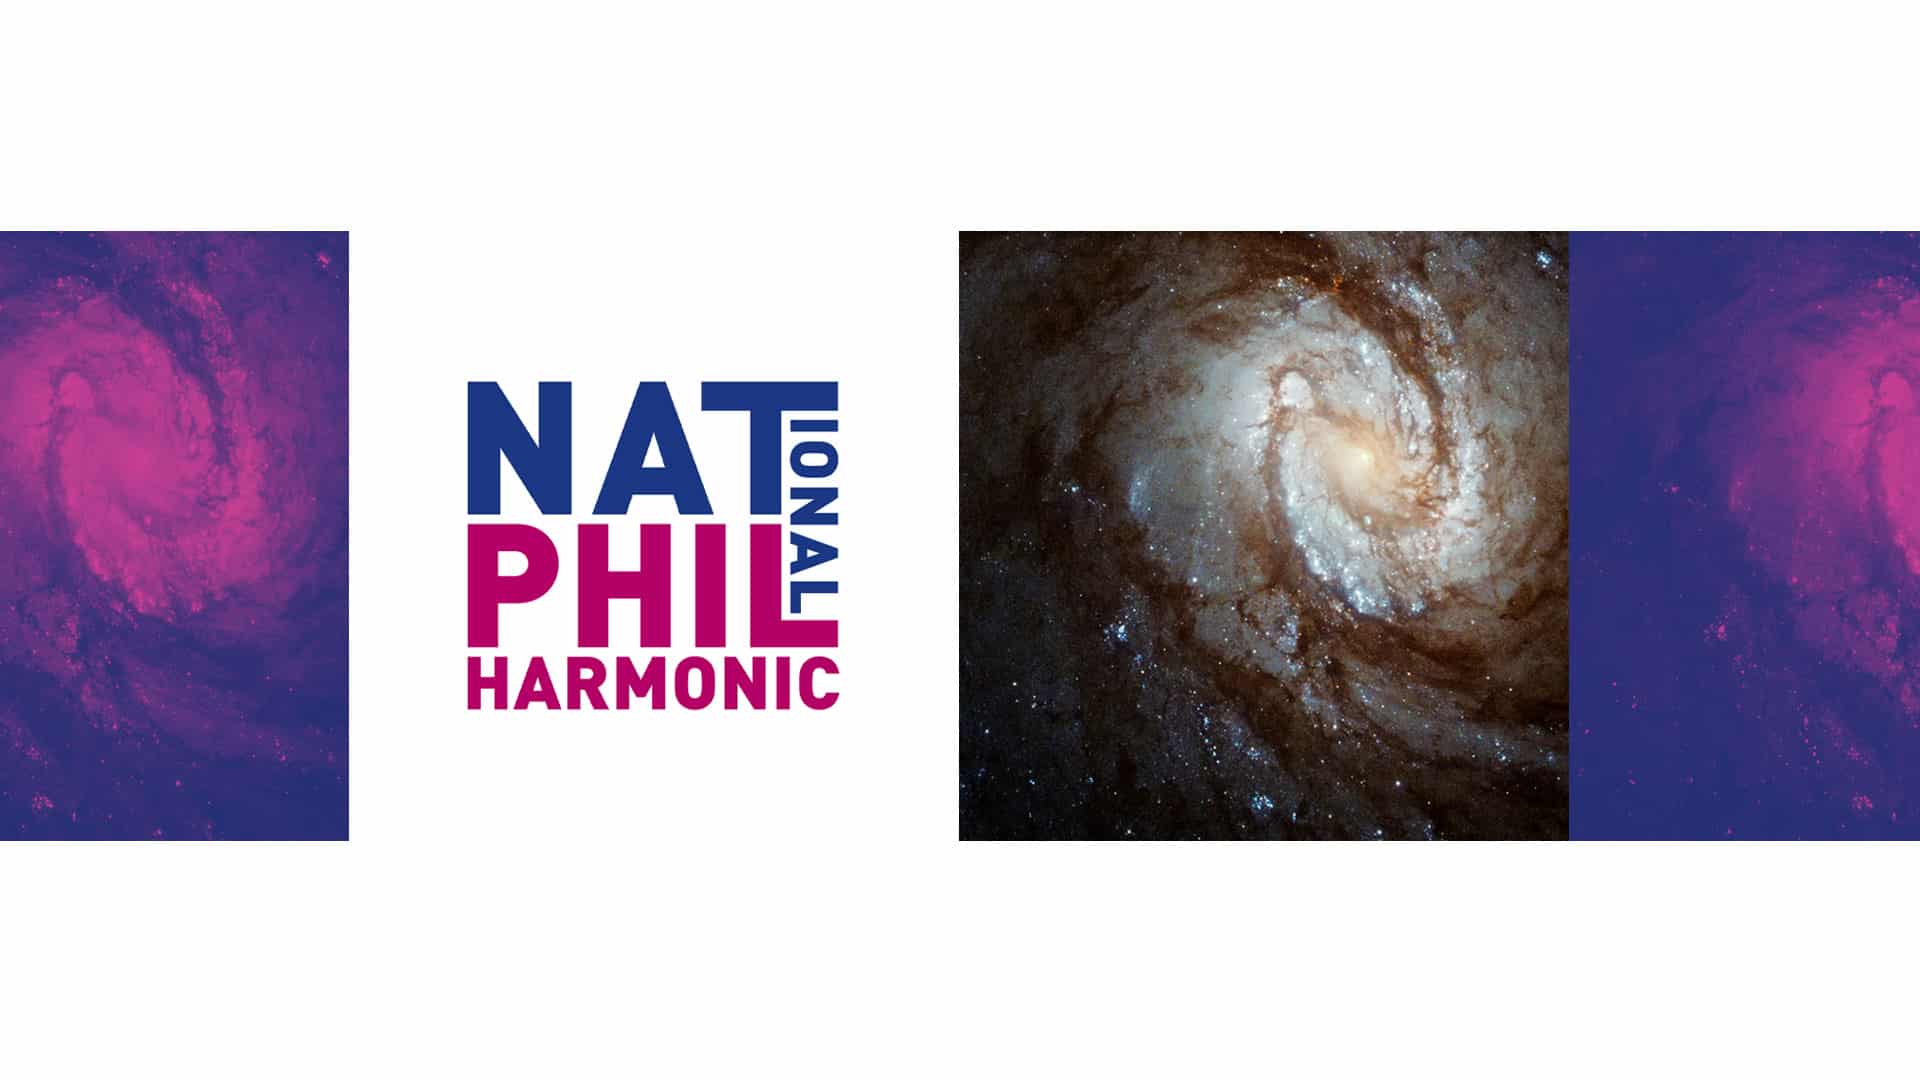 NPO Holst the Planets